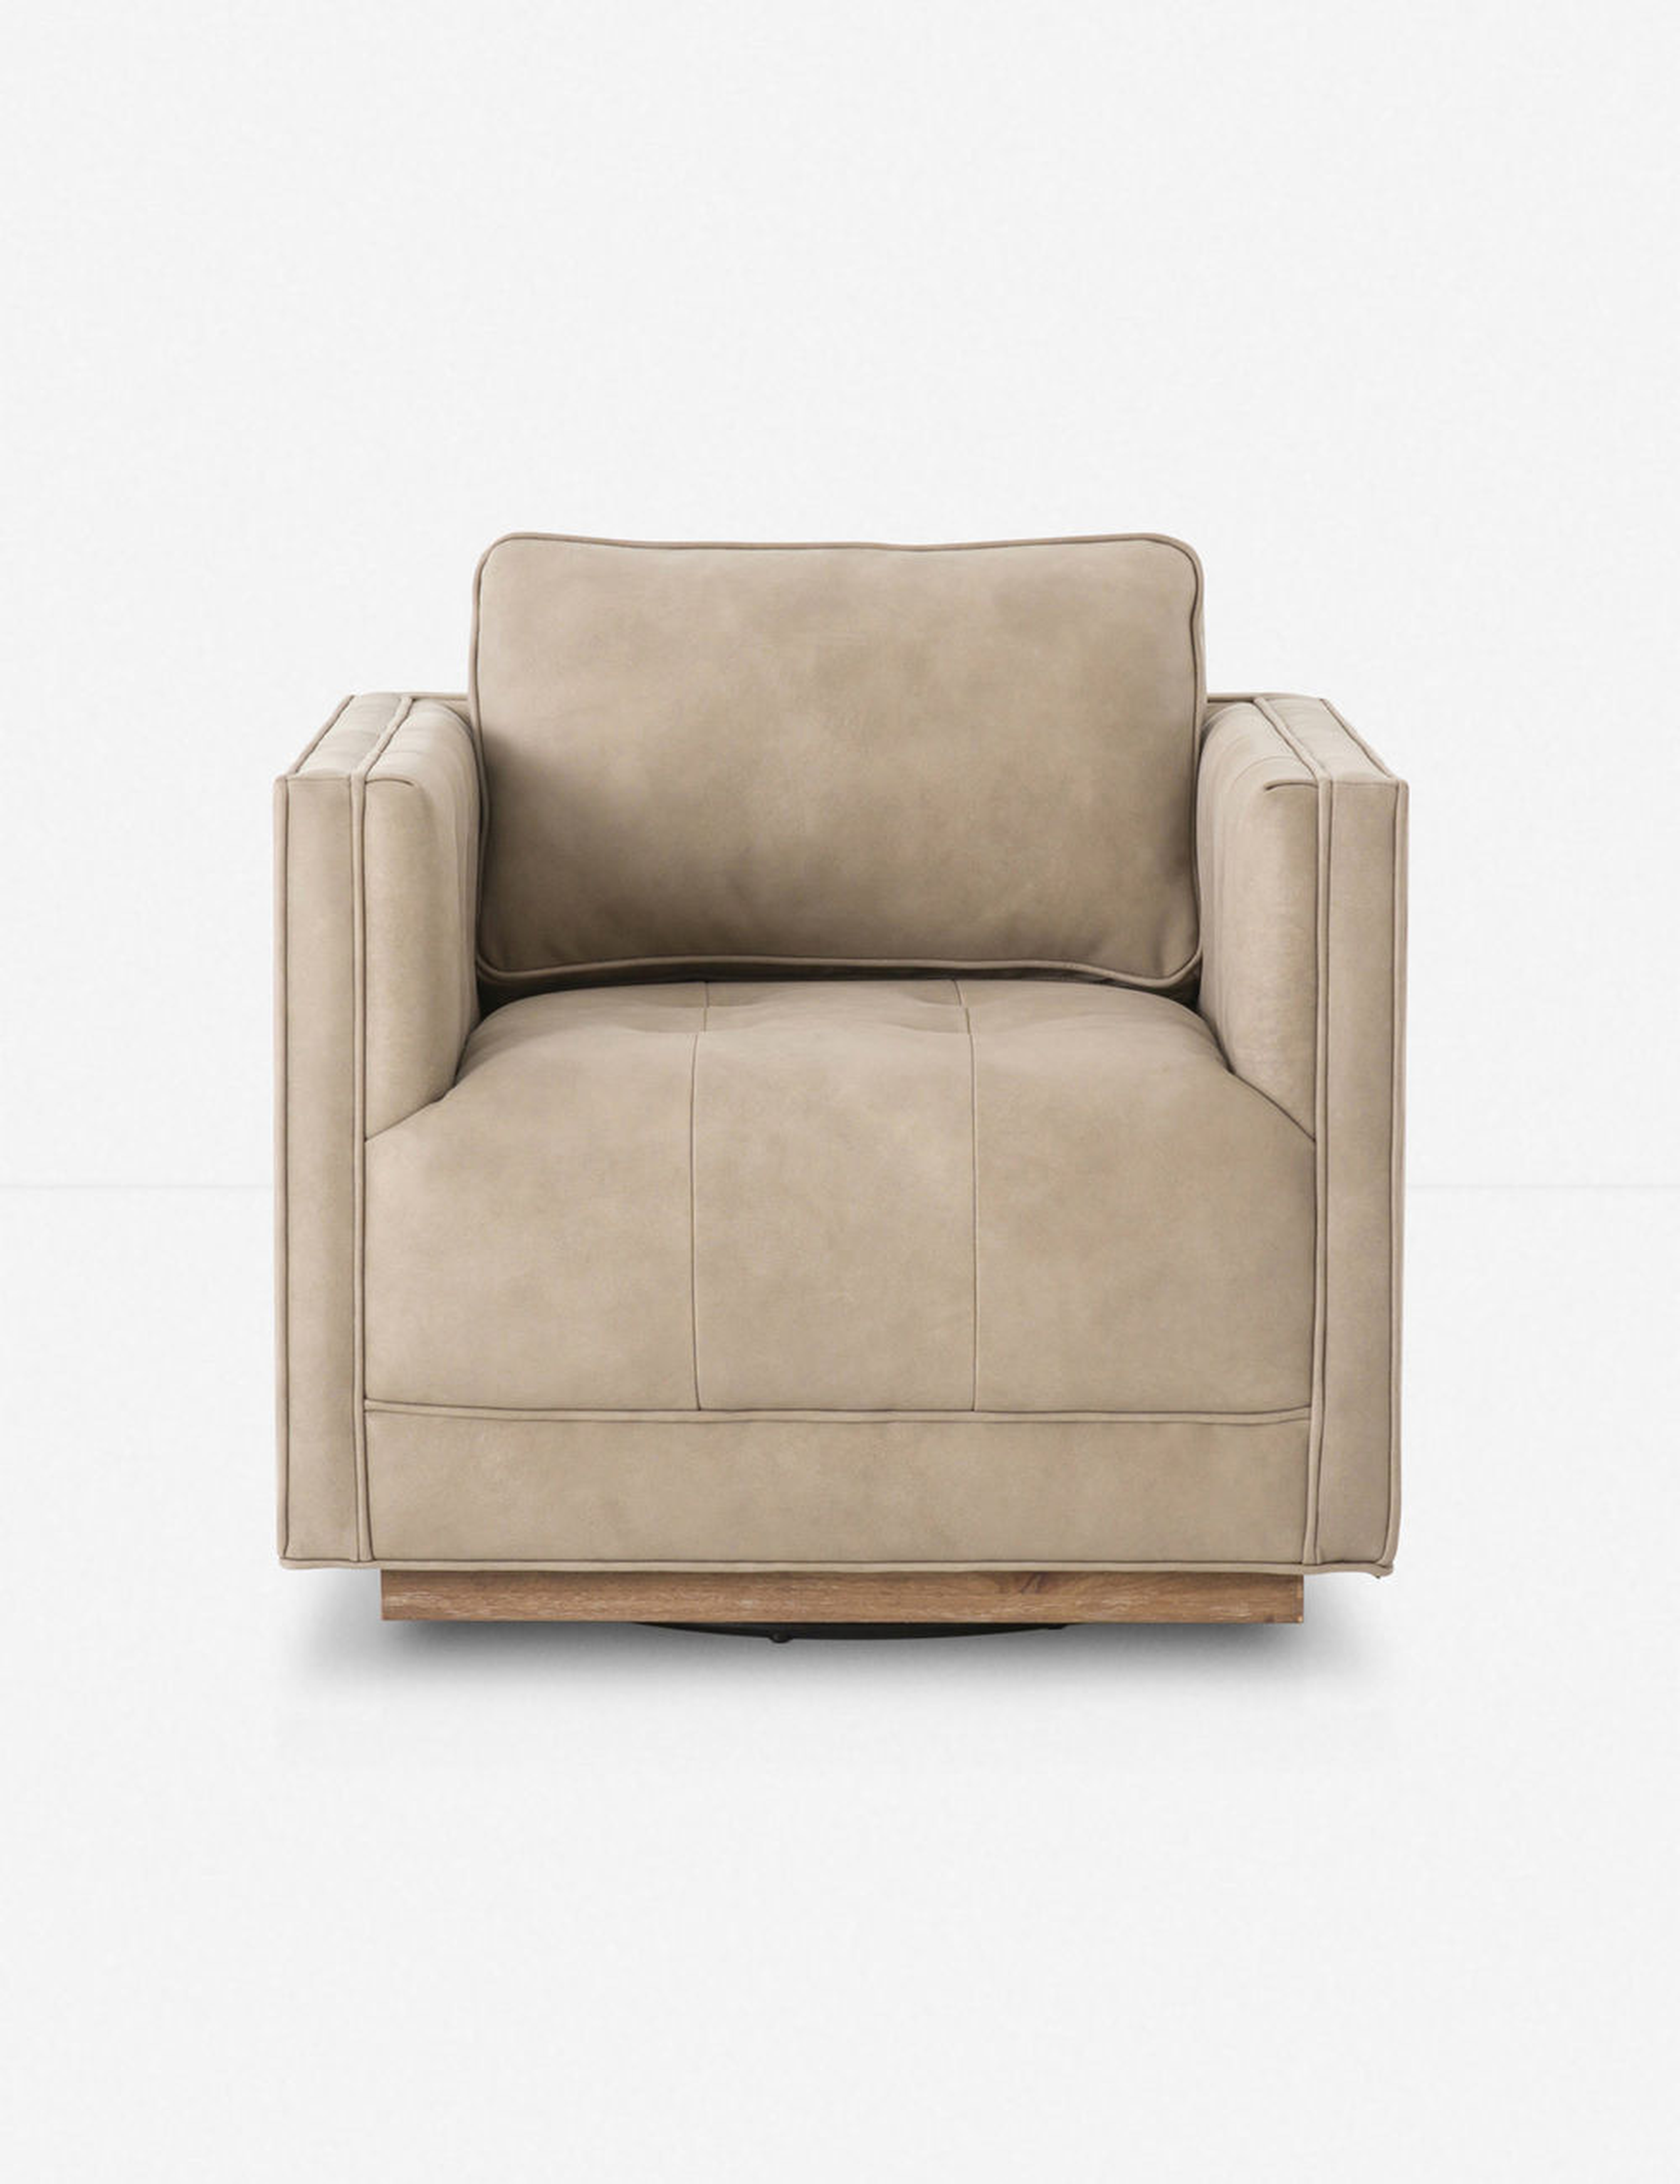 CONSTANCE LEATHER SWIVEL CHAIR, NATURAL - Lulu and Georgia